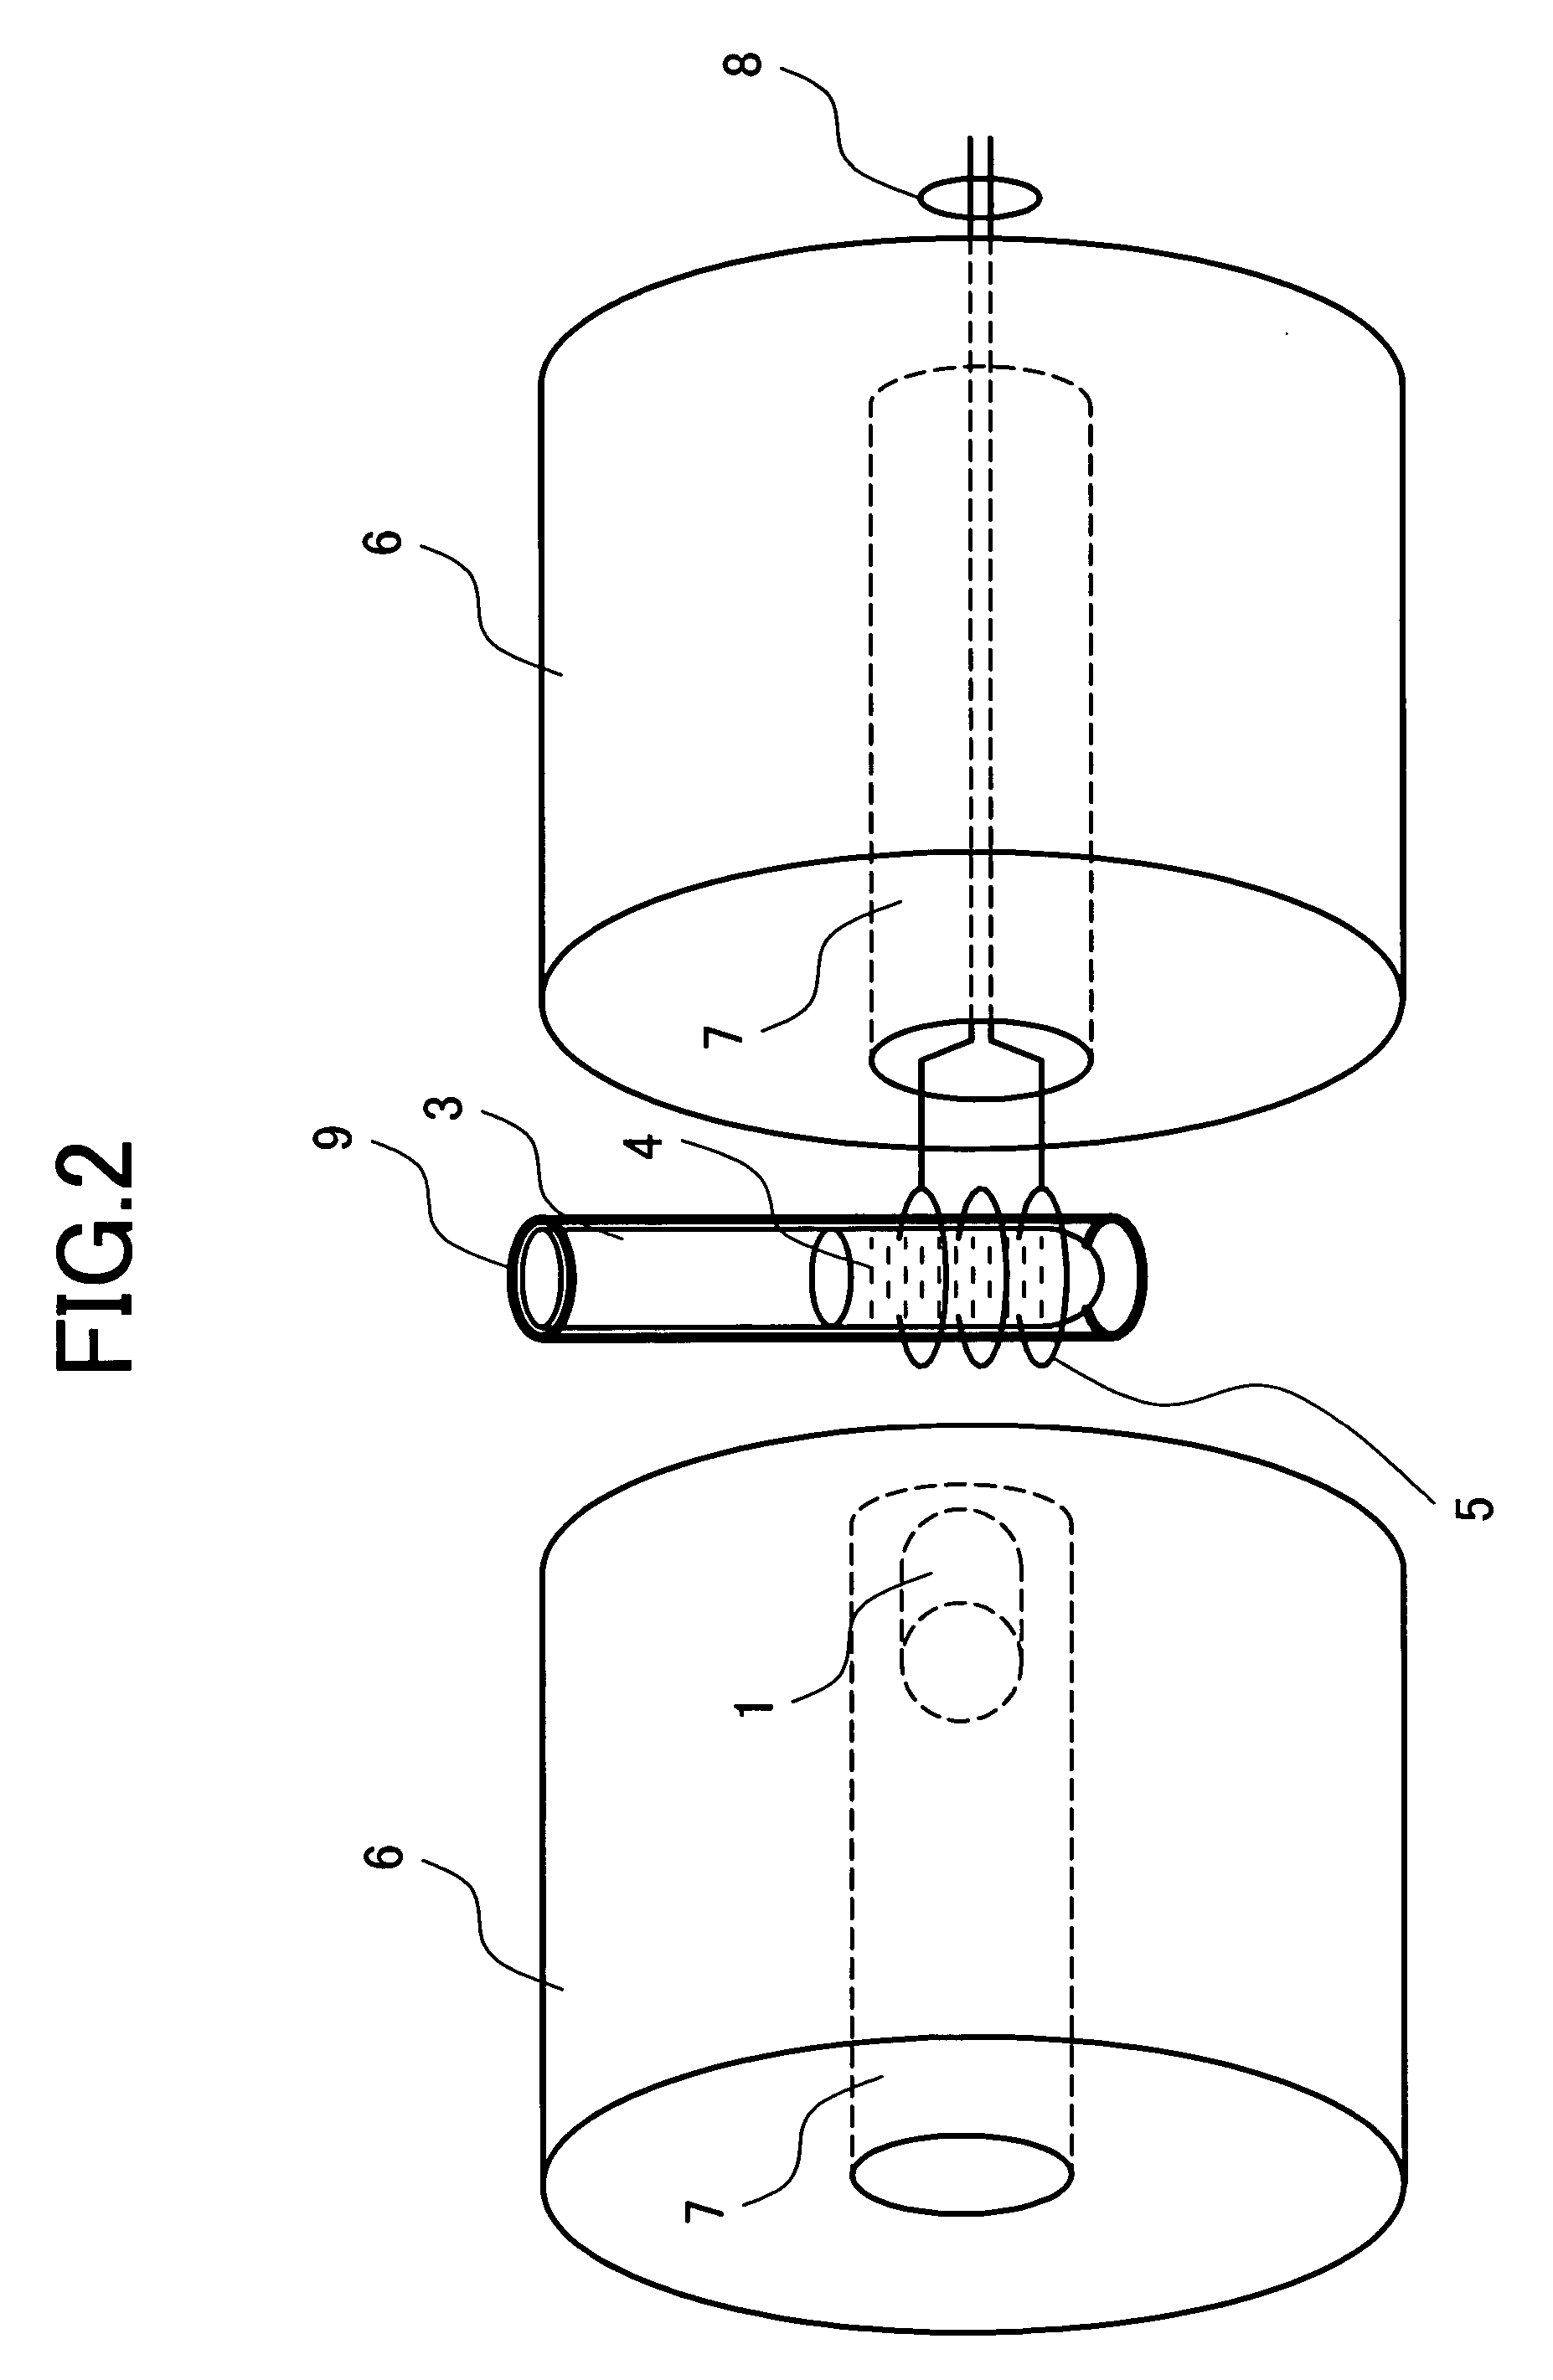 Method and apparatus for multiple spectroscopy analysis by using nuclear magnetic resonance